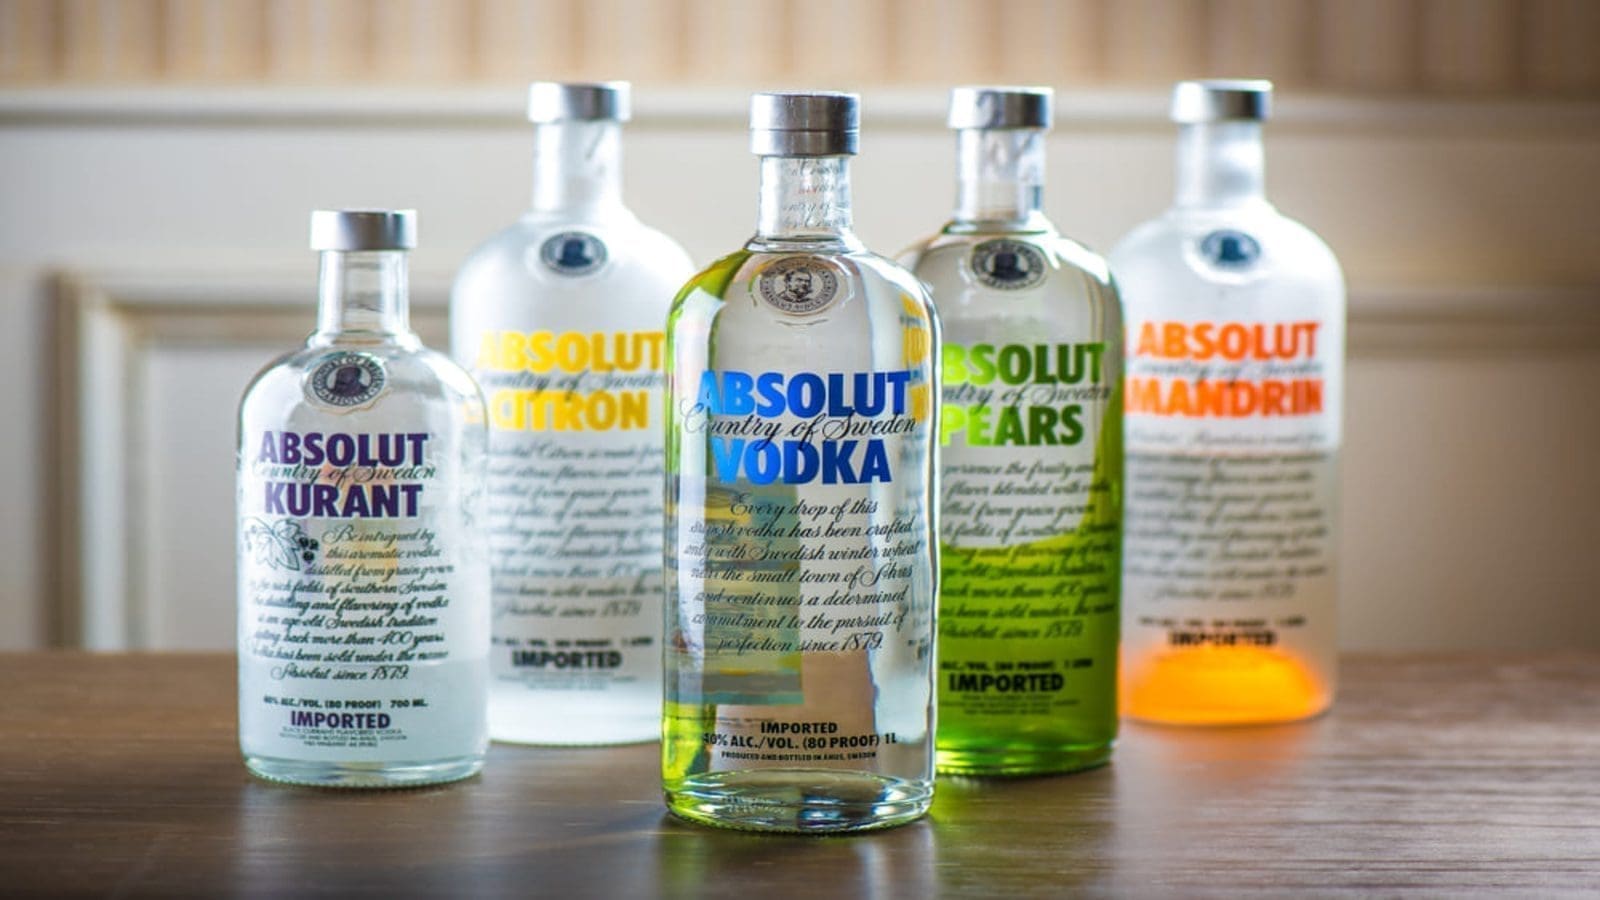 Absolut Vodka, Ardagh Group co-invest in glass packaging production using hydrogen energy-fired glass furnace